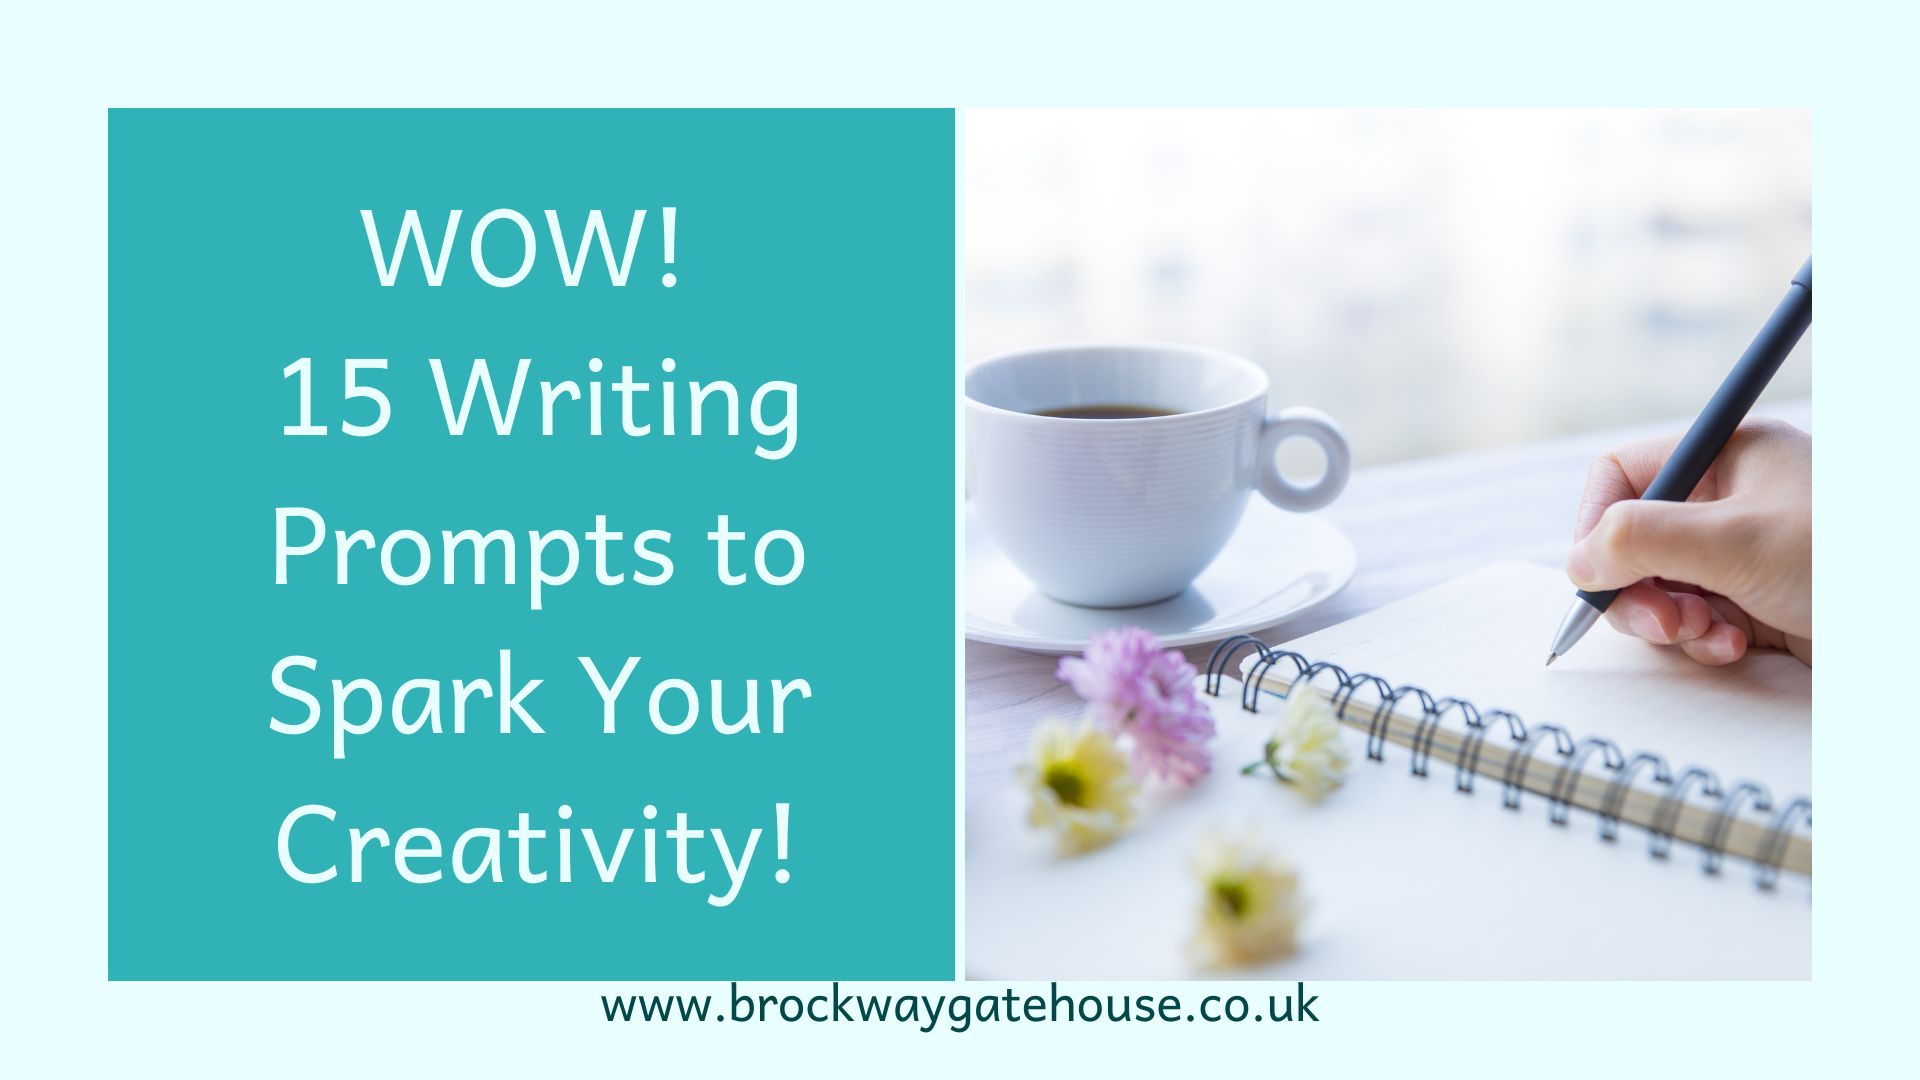 WOW! 15 Stunning Writing Prompts to Spark Your Creativity!